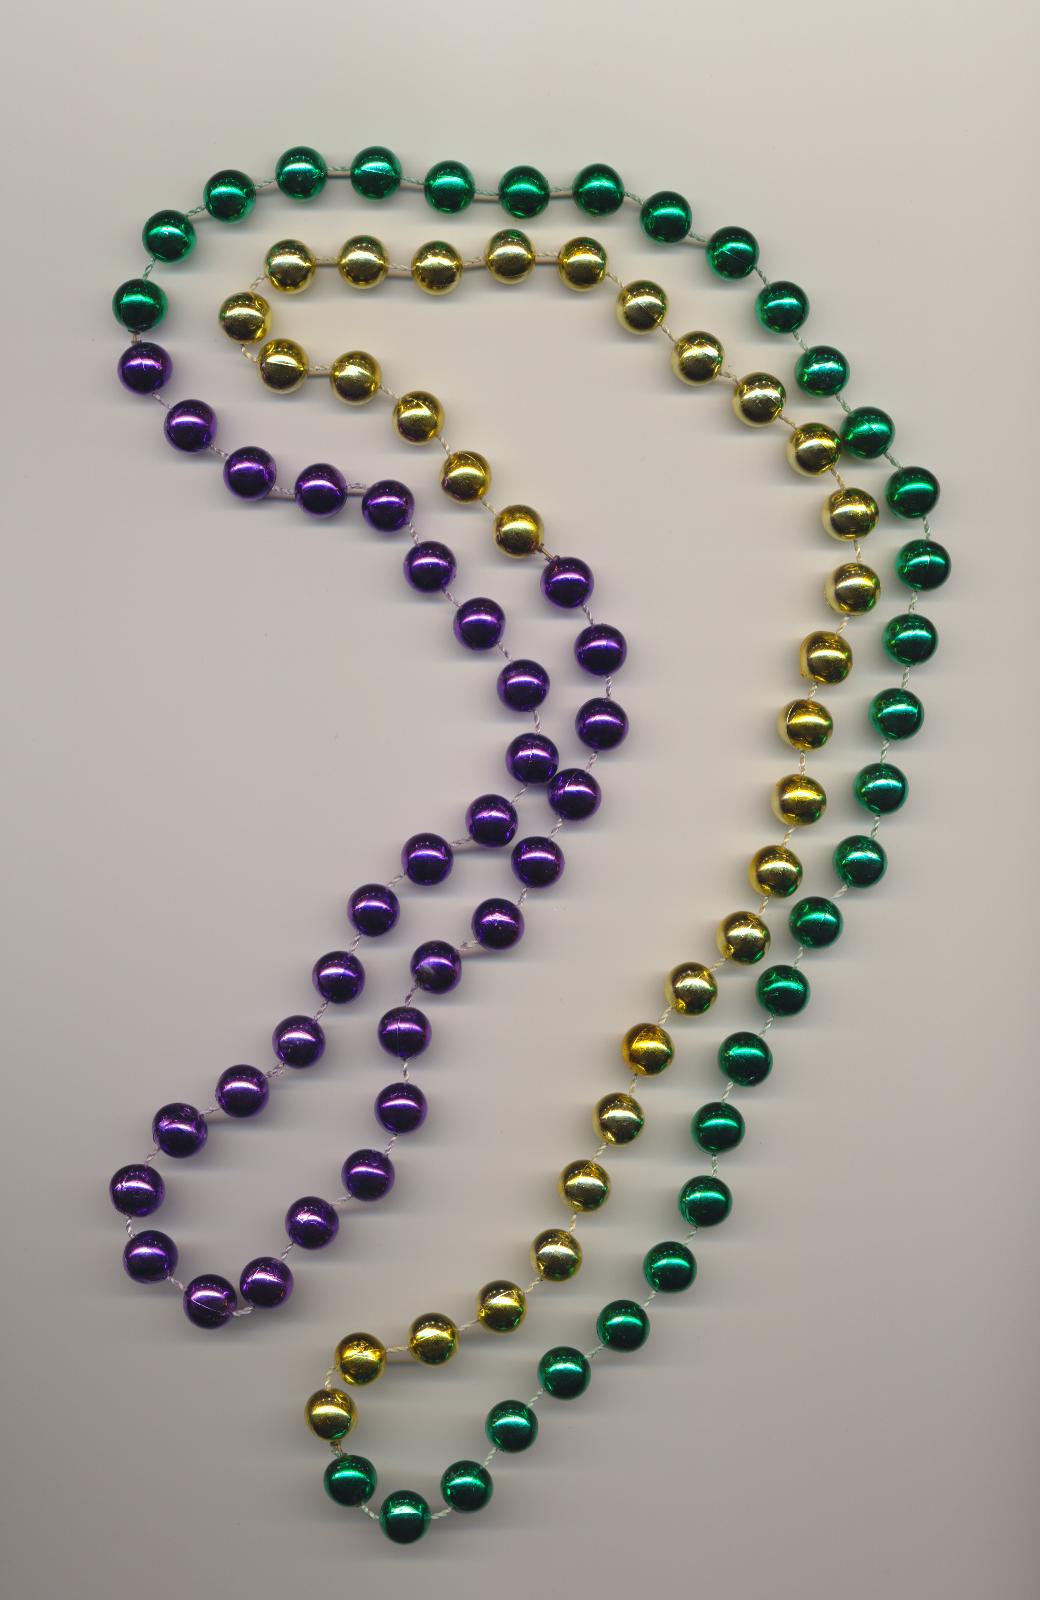 Plastic imitation bead necklace in the traditional Mardi